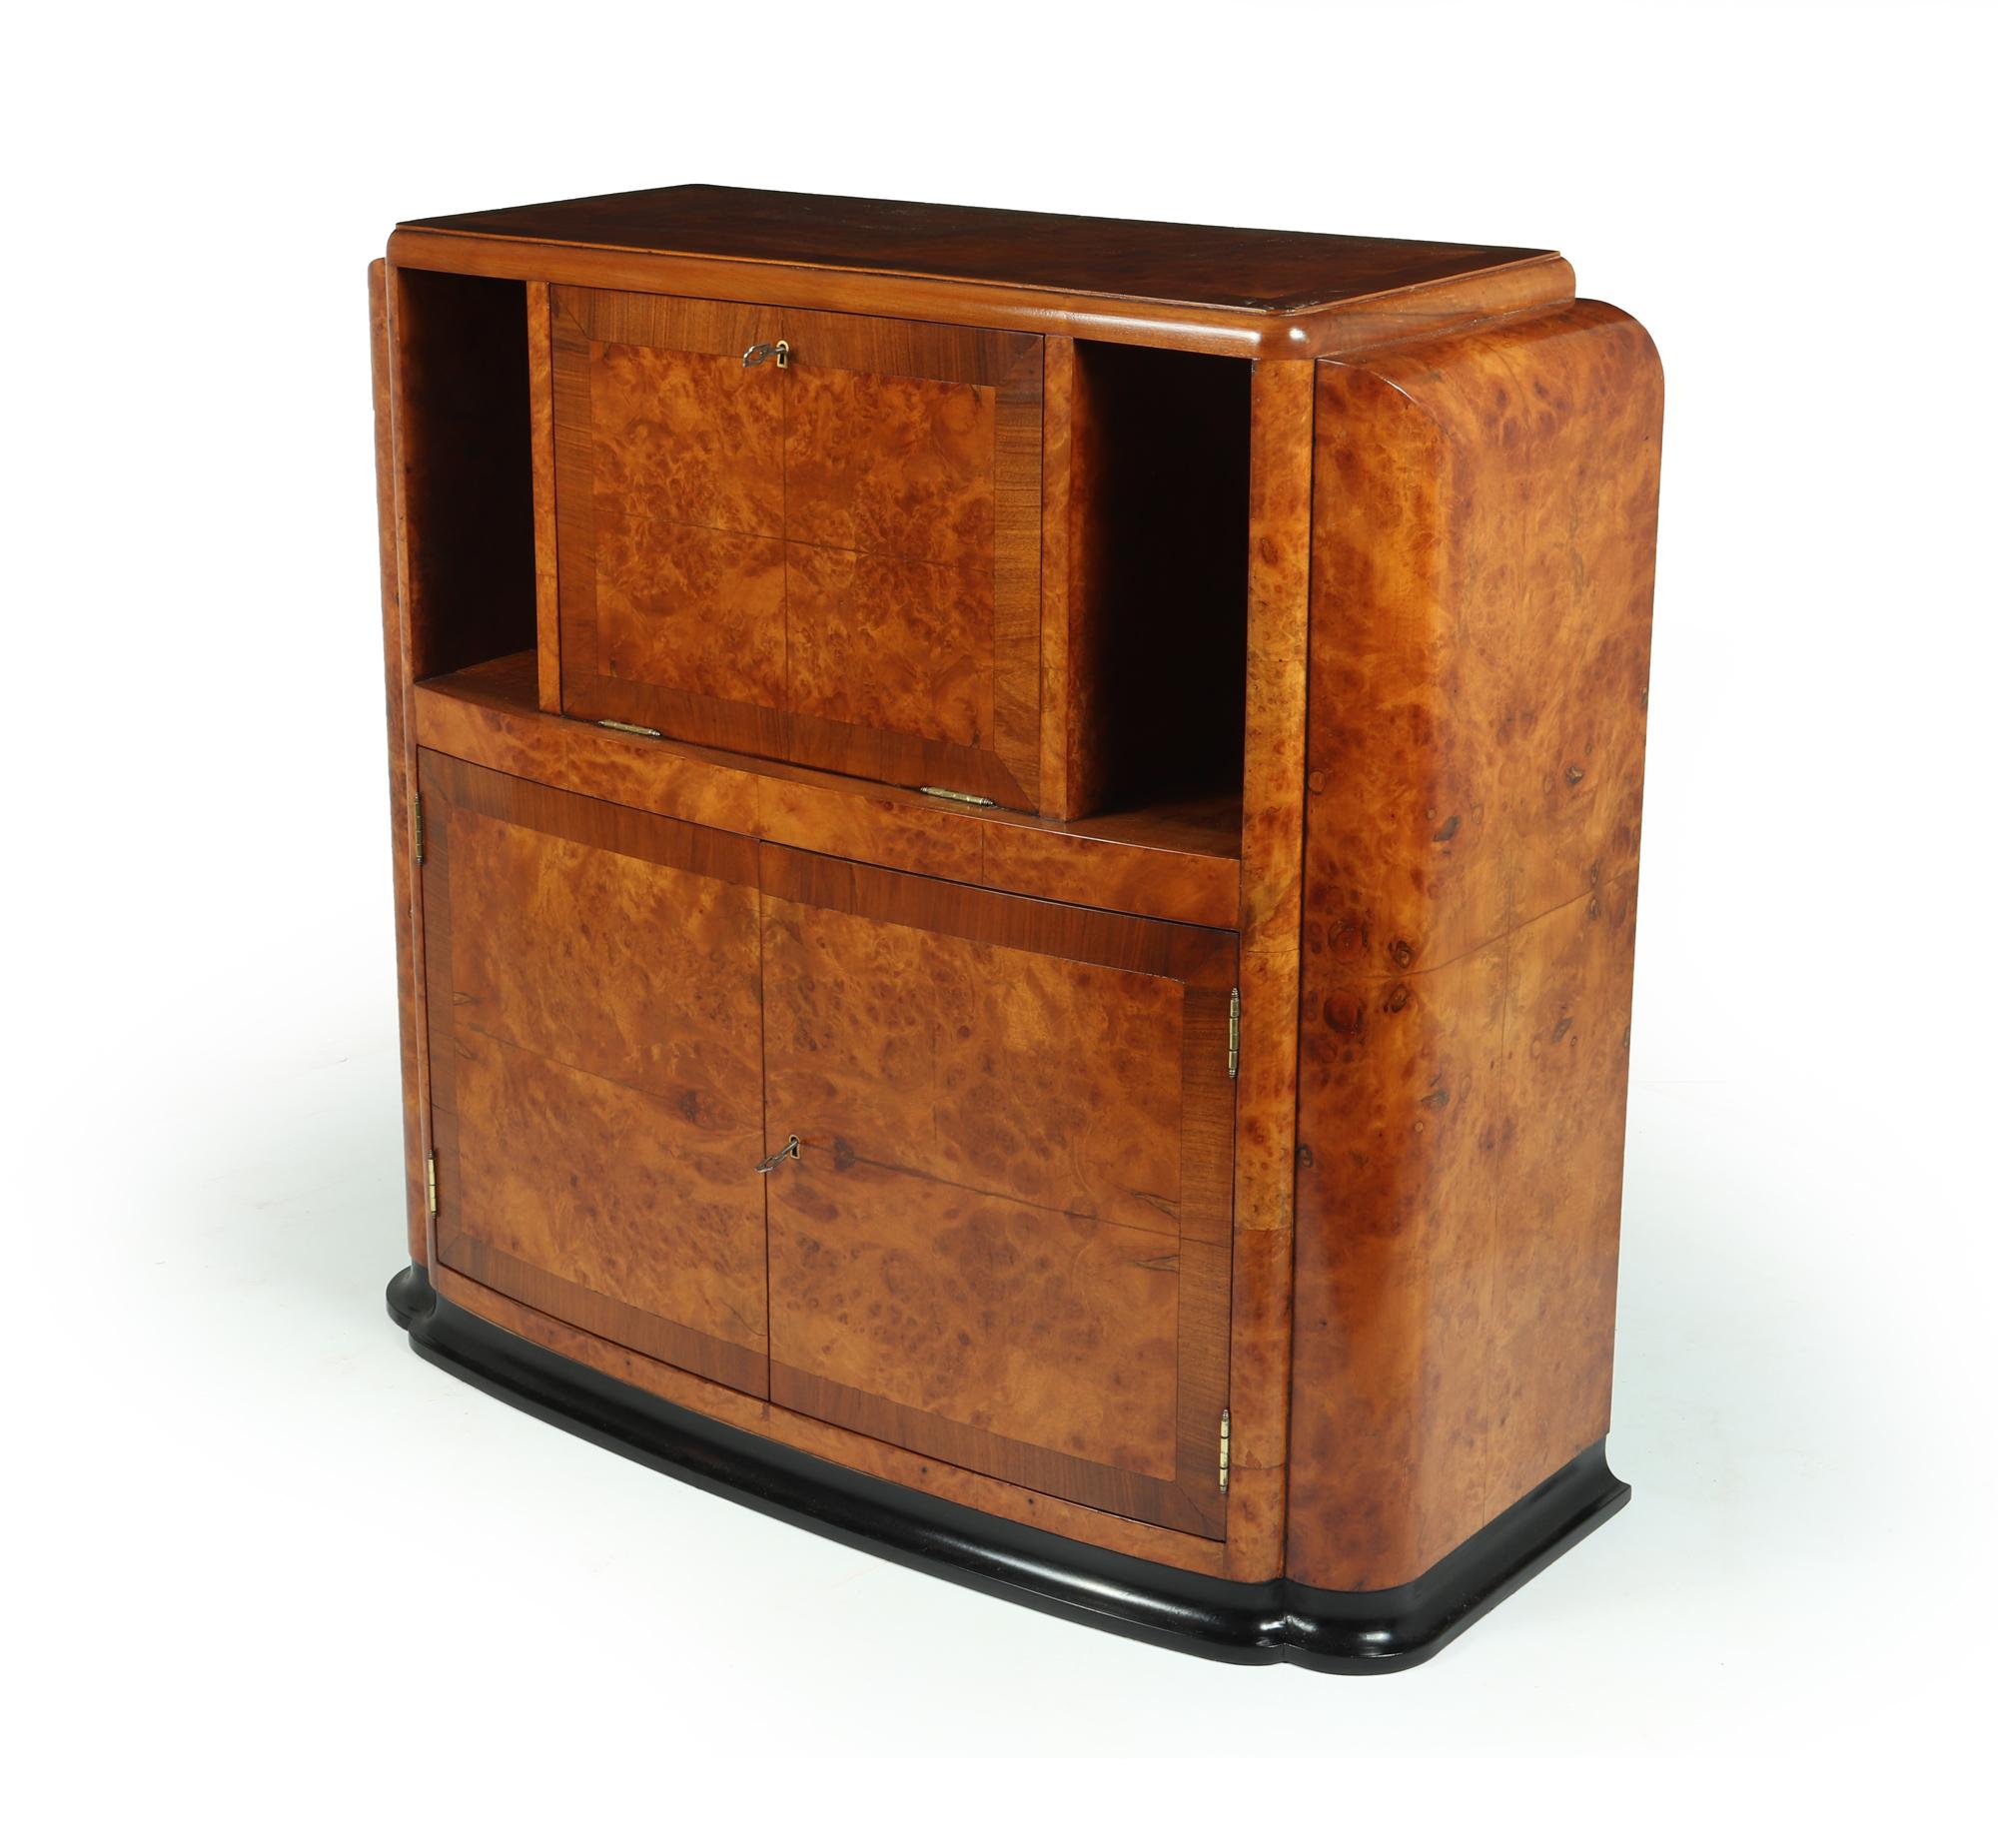 An exceptional and rare Art Deco cocktail cabinet, in burr walnut and cross-banded, with a fall down lockable drinks area, and a pair of lockable doors below, two original keys supplied with working locks, the cocktail is a great size, it retains